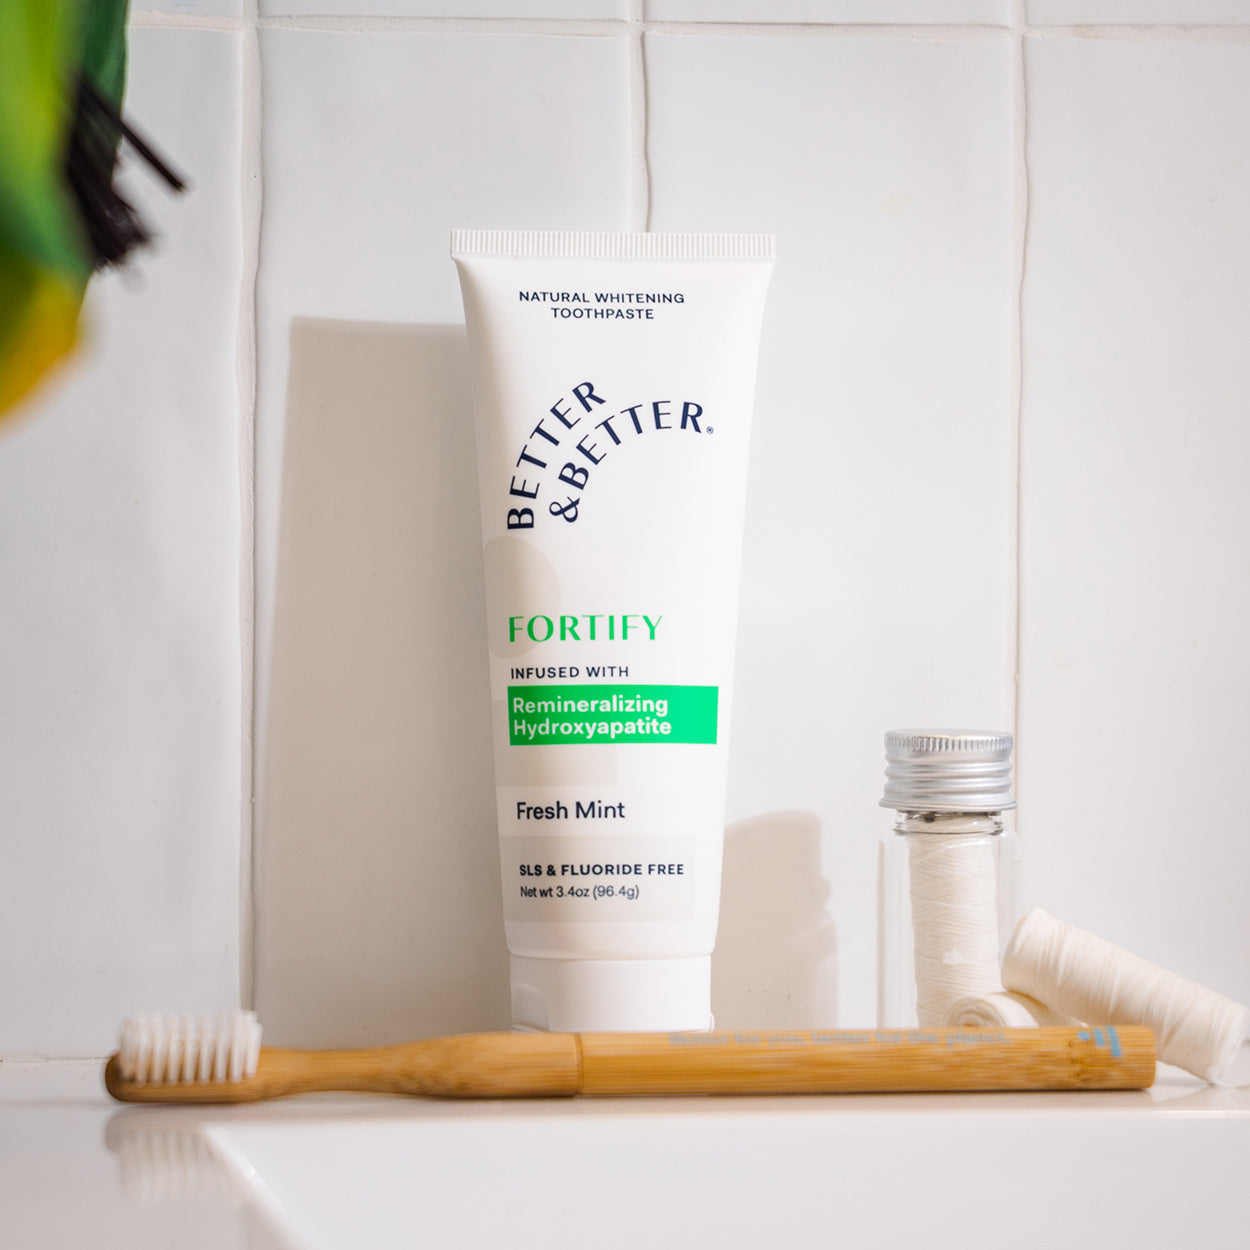 Fortify Toothpaste 2 Pack by Better & Better